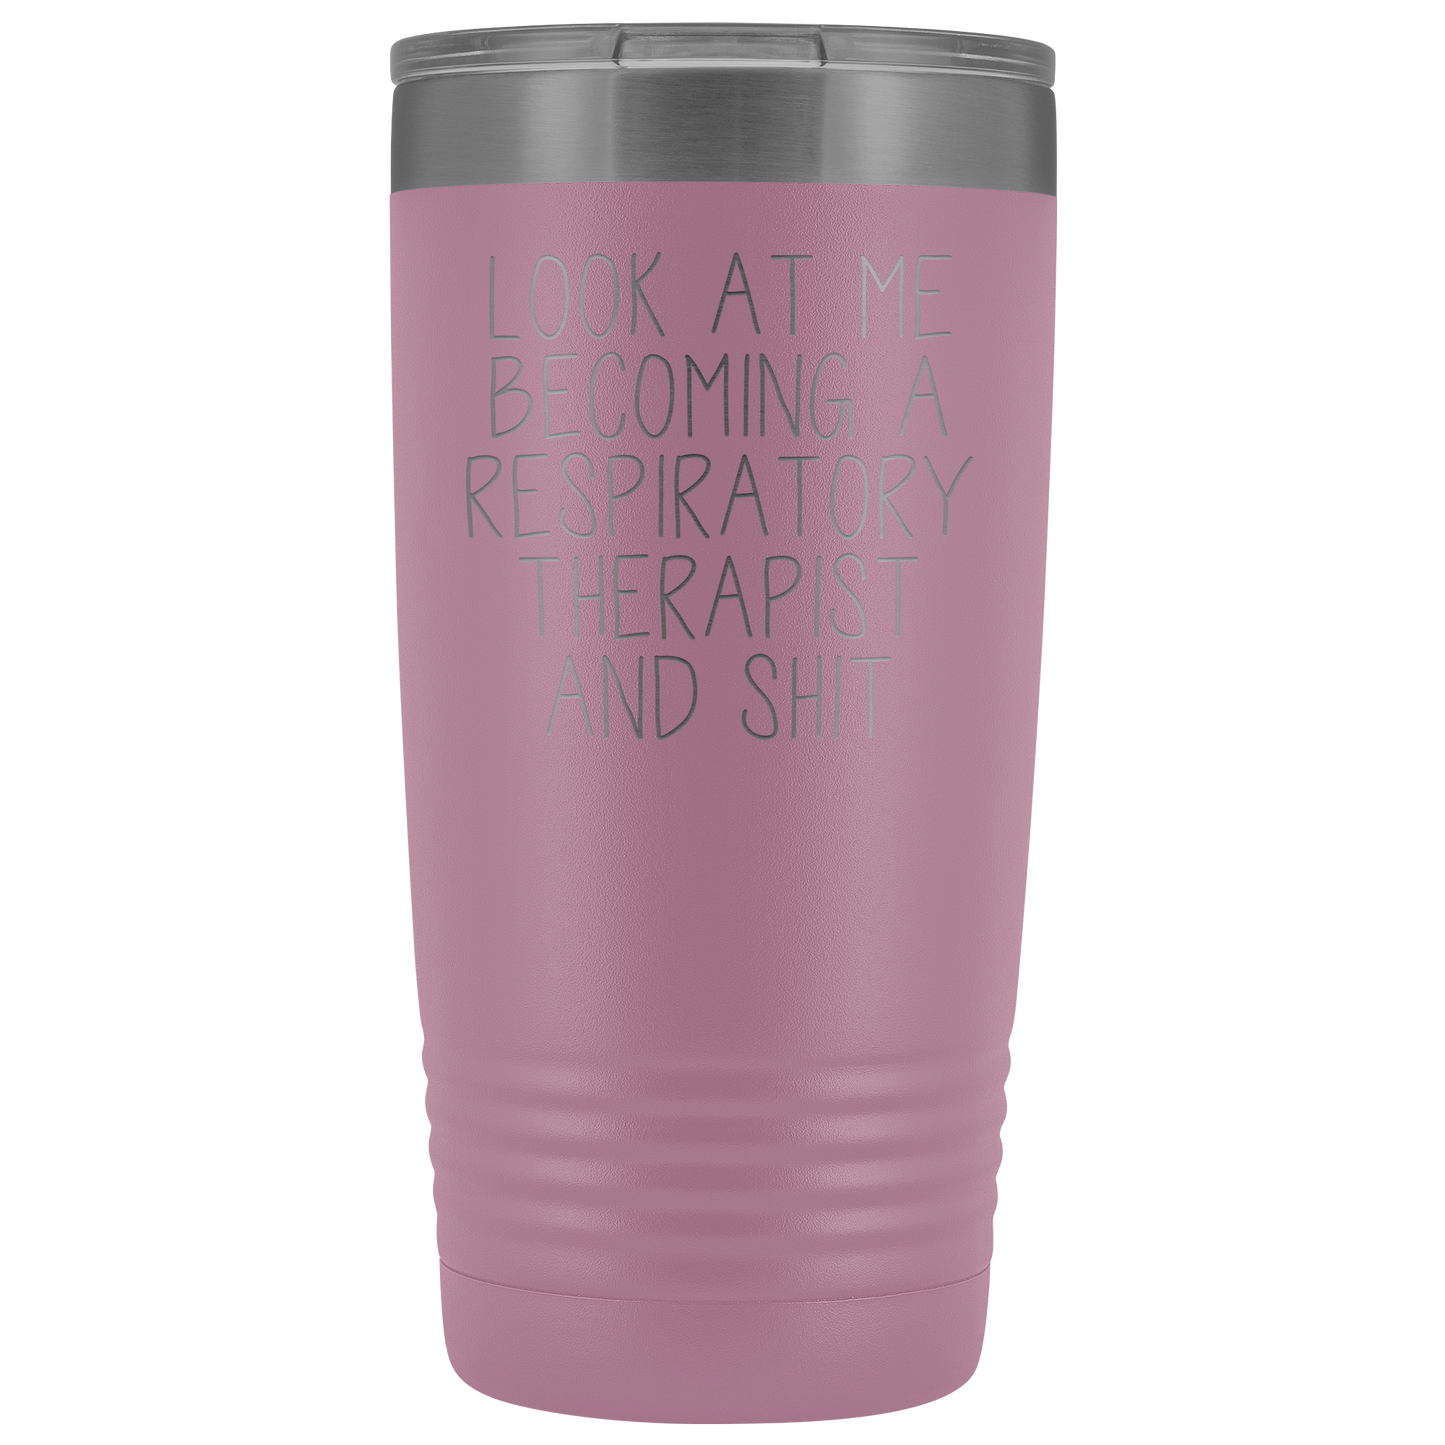 Respiratory Therapist Gifts, Respiratory Therapist Tumbler, Coffee Mug, Funny Birthday Gifts for Men and Women